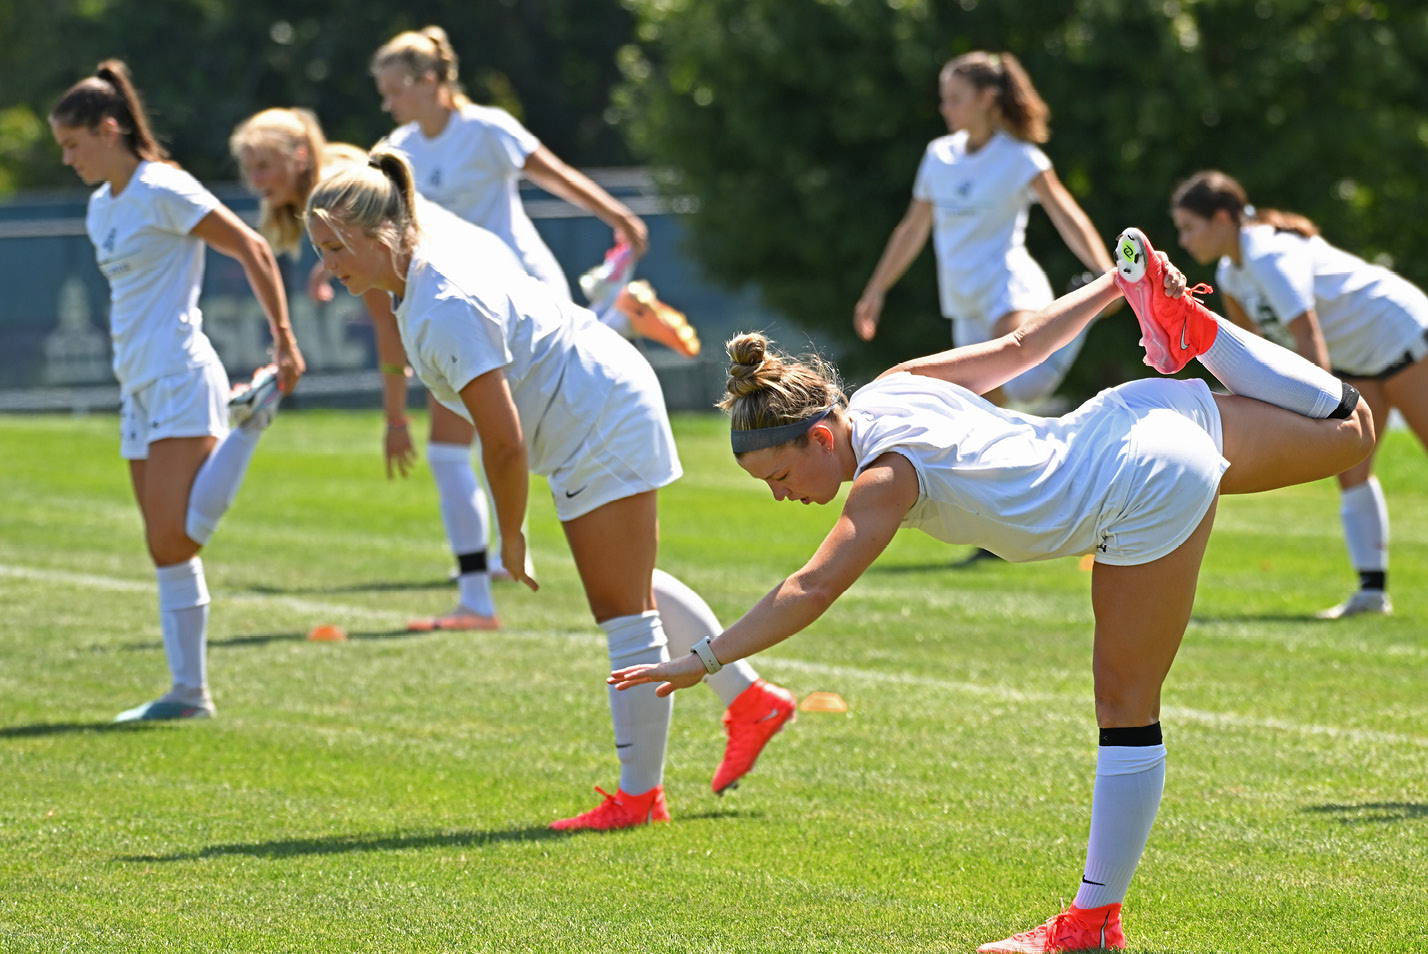 Women's soccer players warming up on the Green.